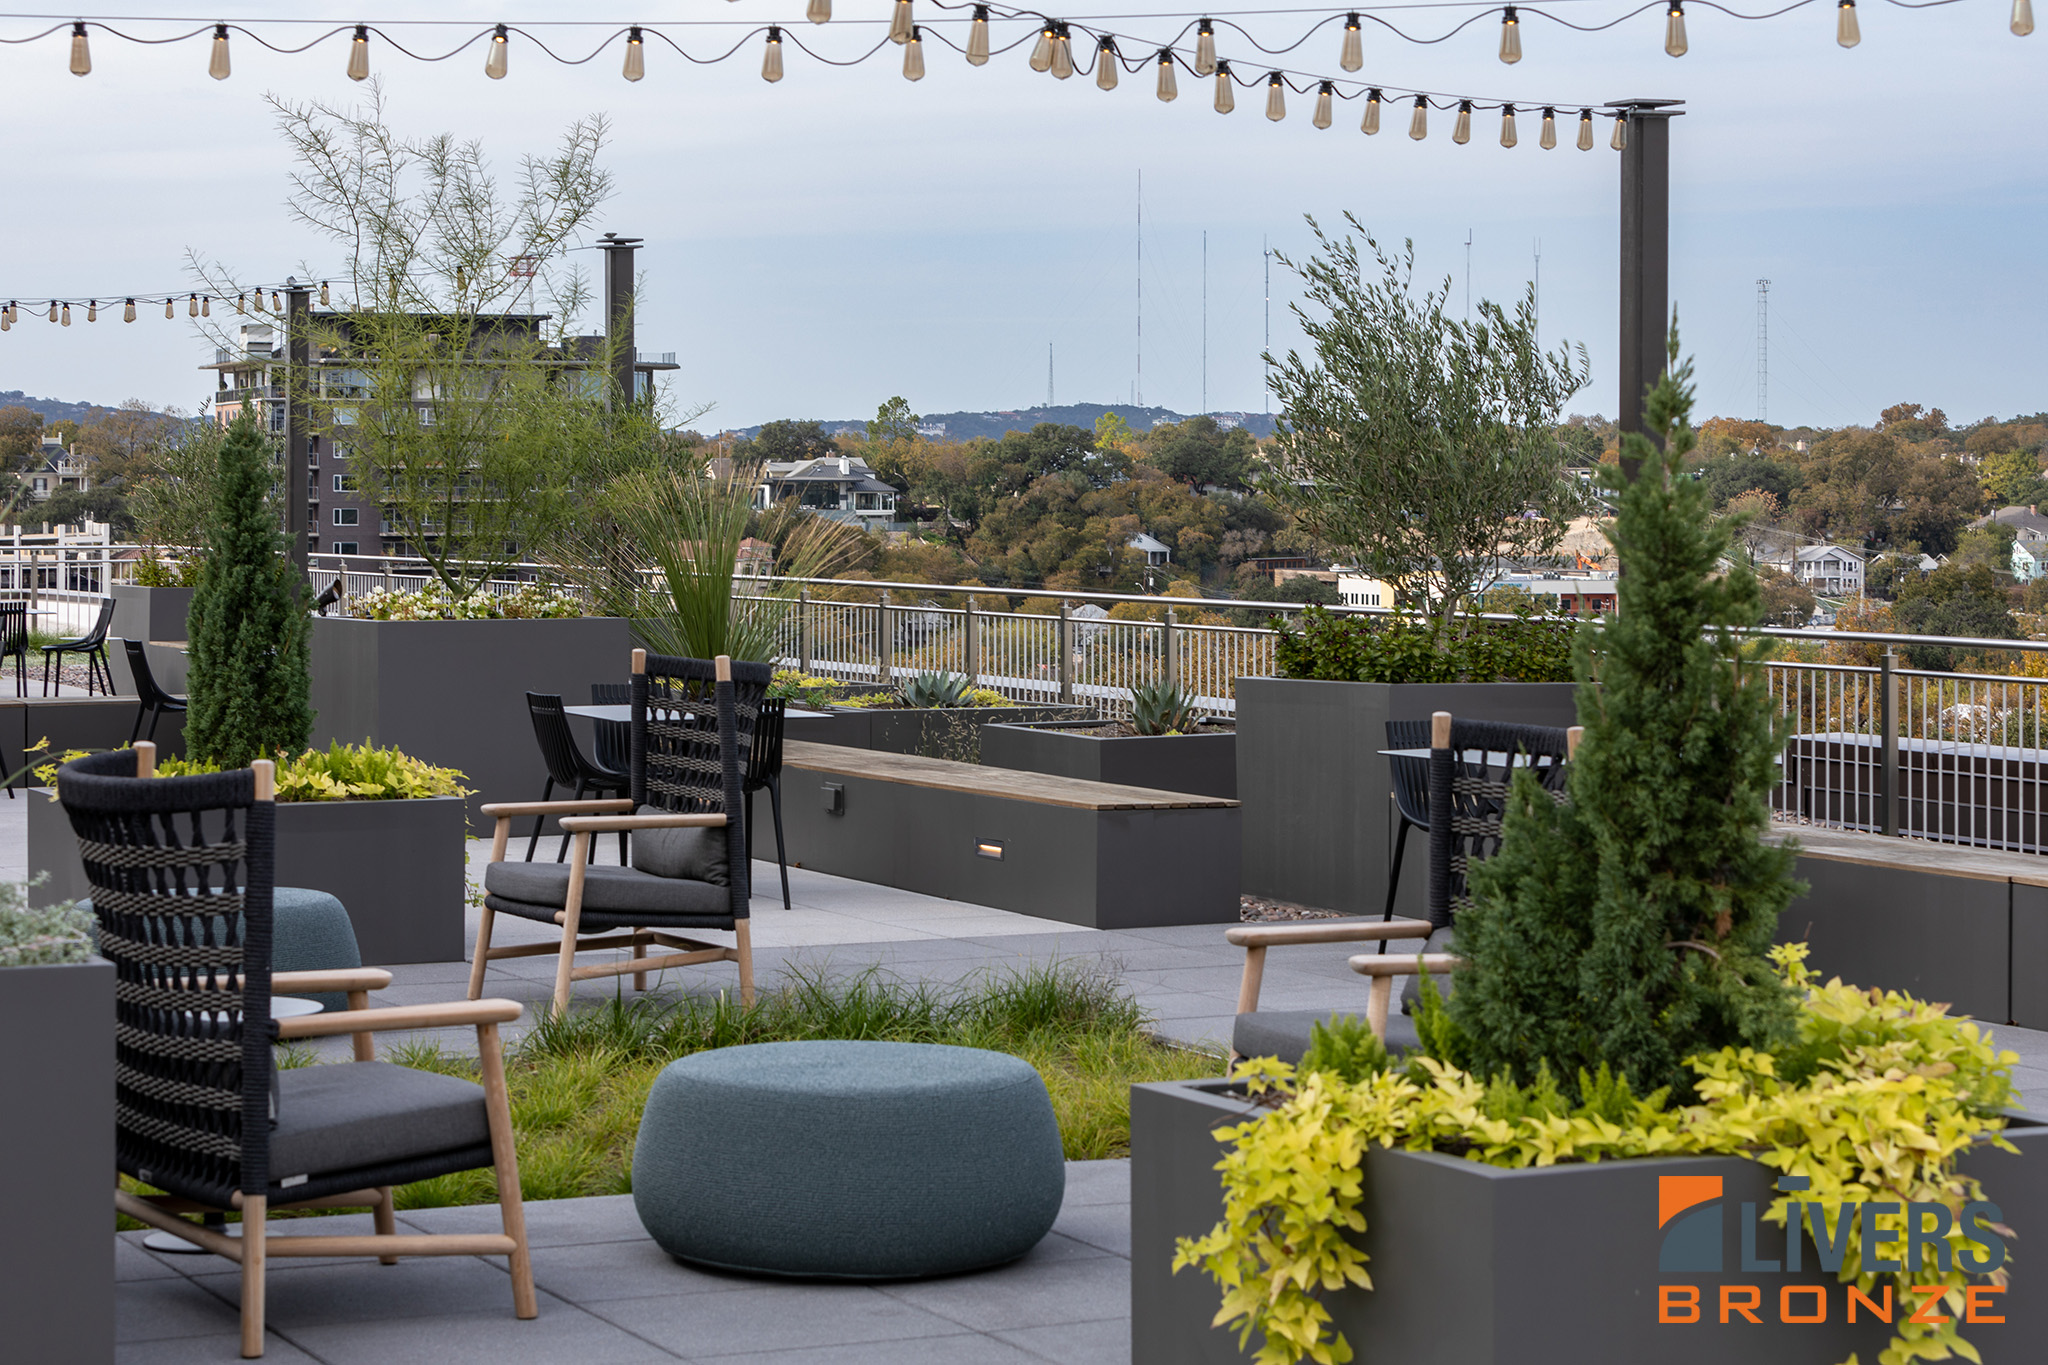 Livers Bronze Mirage with Stainless Steel Picket Railings were installed on the Rooftop deck at an office building in Austin, Texas, and were made in the USA.